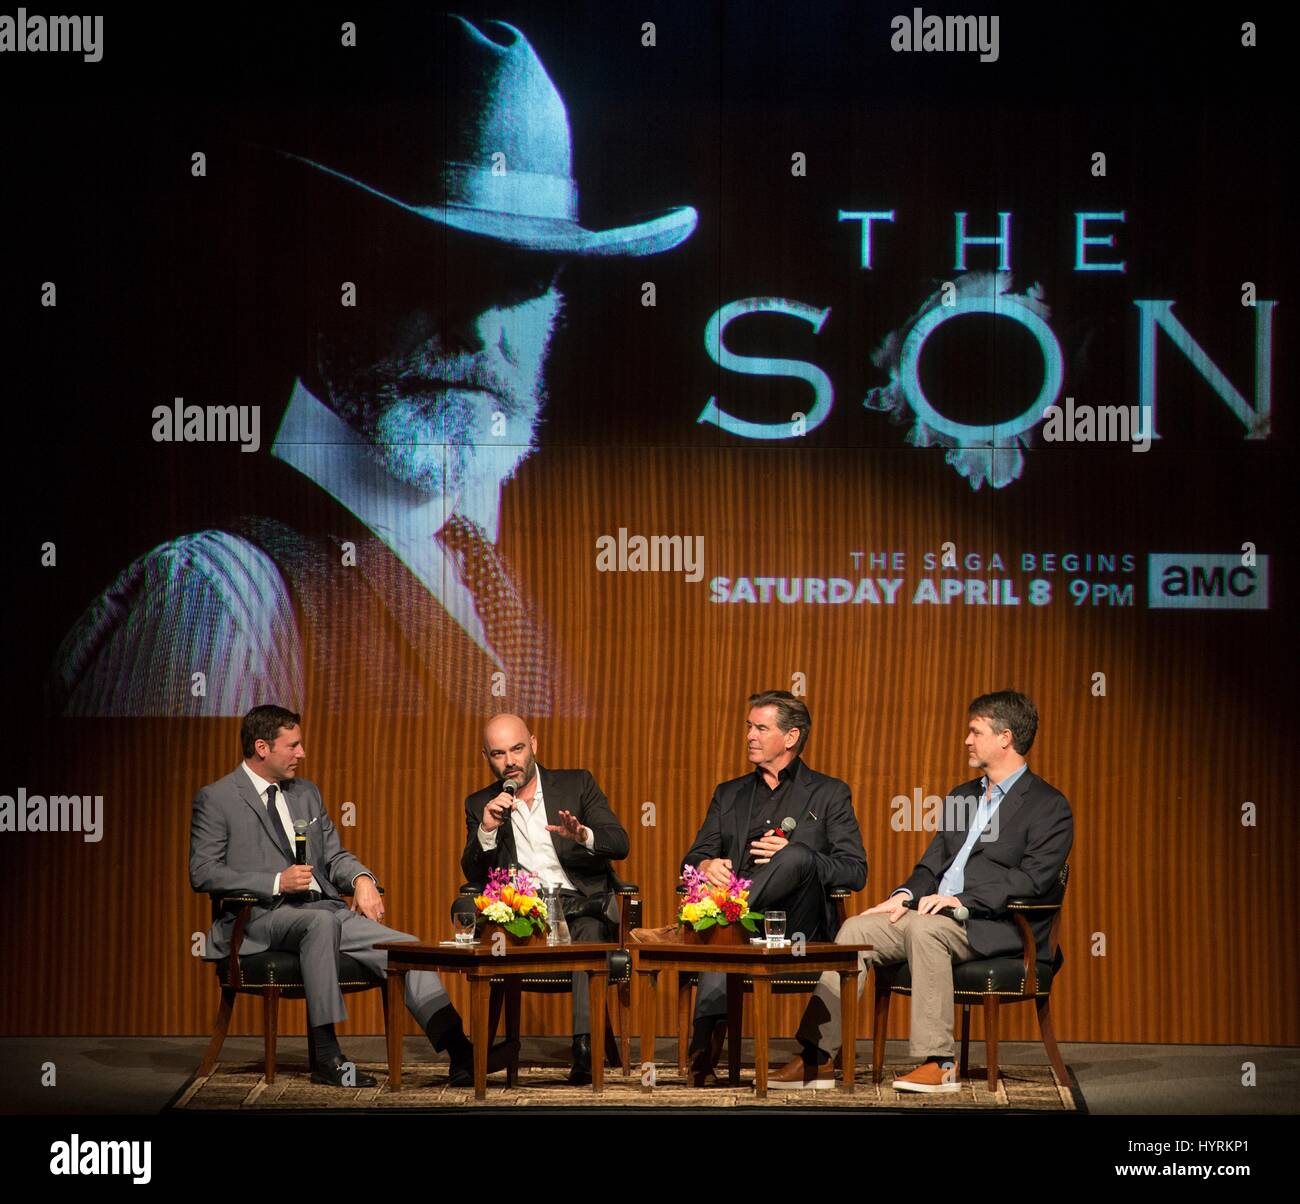 LBJ Presidential Library Director Mark Updegrove (left), author Philipp Meyer, actor Pierce Brosnan, and executive producer Kevin Murphy discuss the new AMC television series The Son based on Meyers novel at the LBJ Presidential Library March 13, 2017 in Austin, Texas. Stock Photo